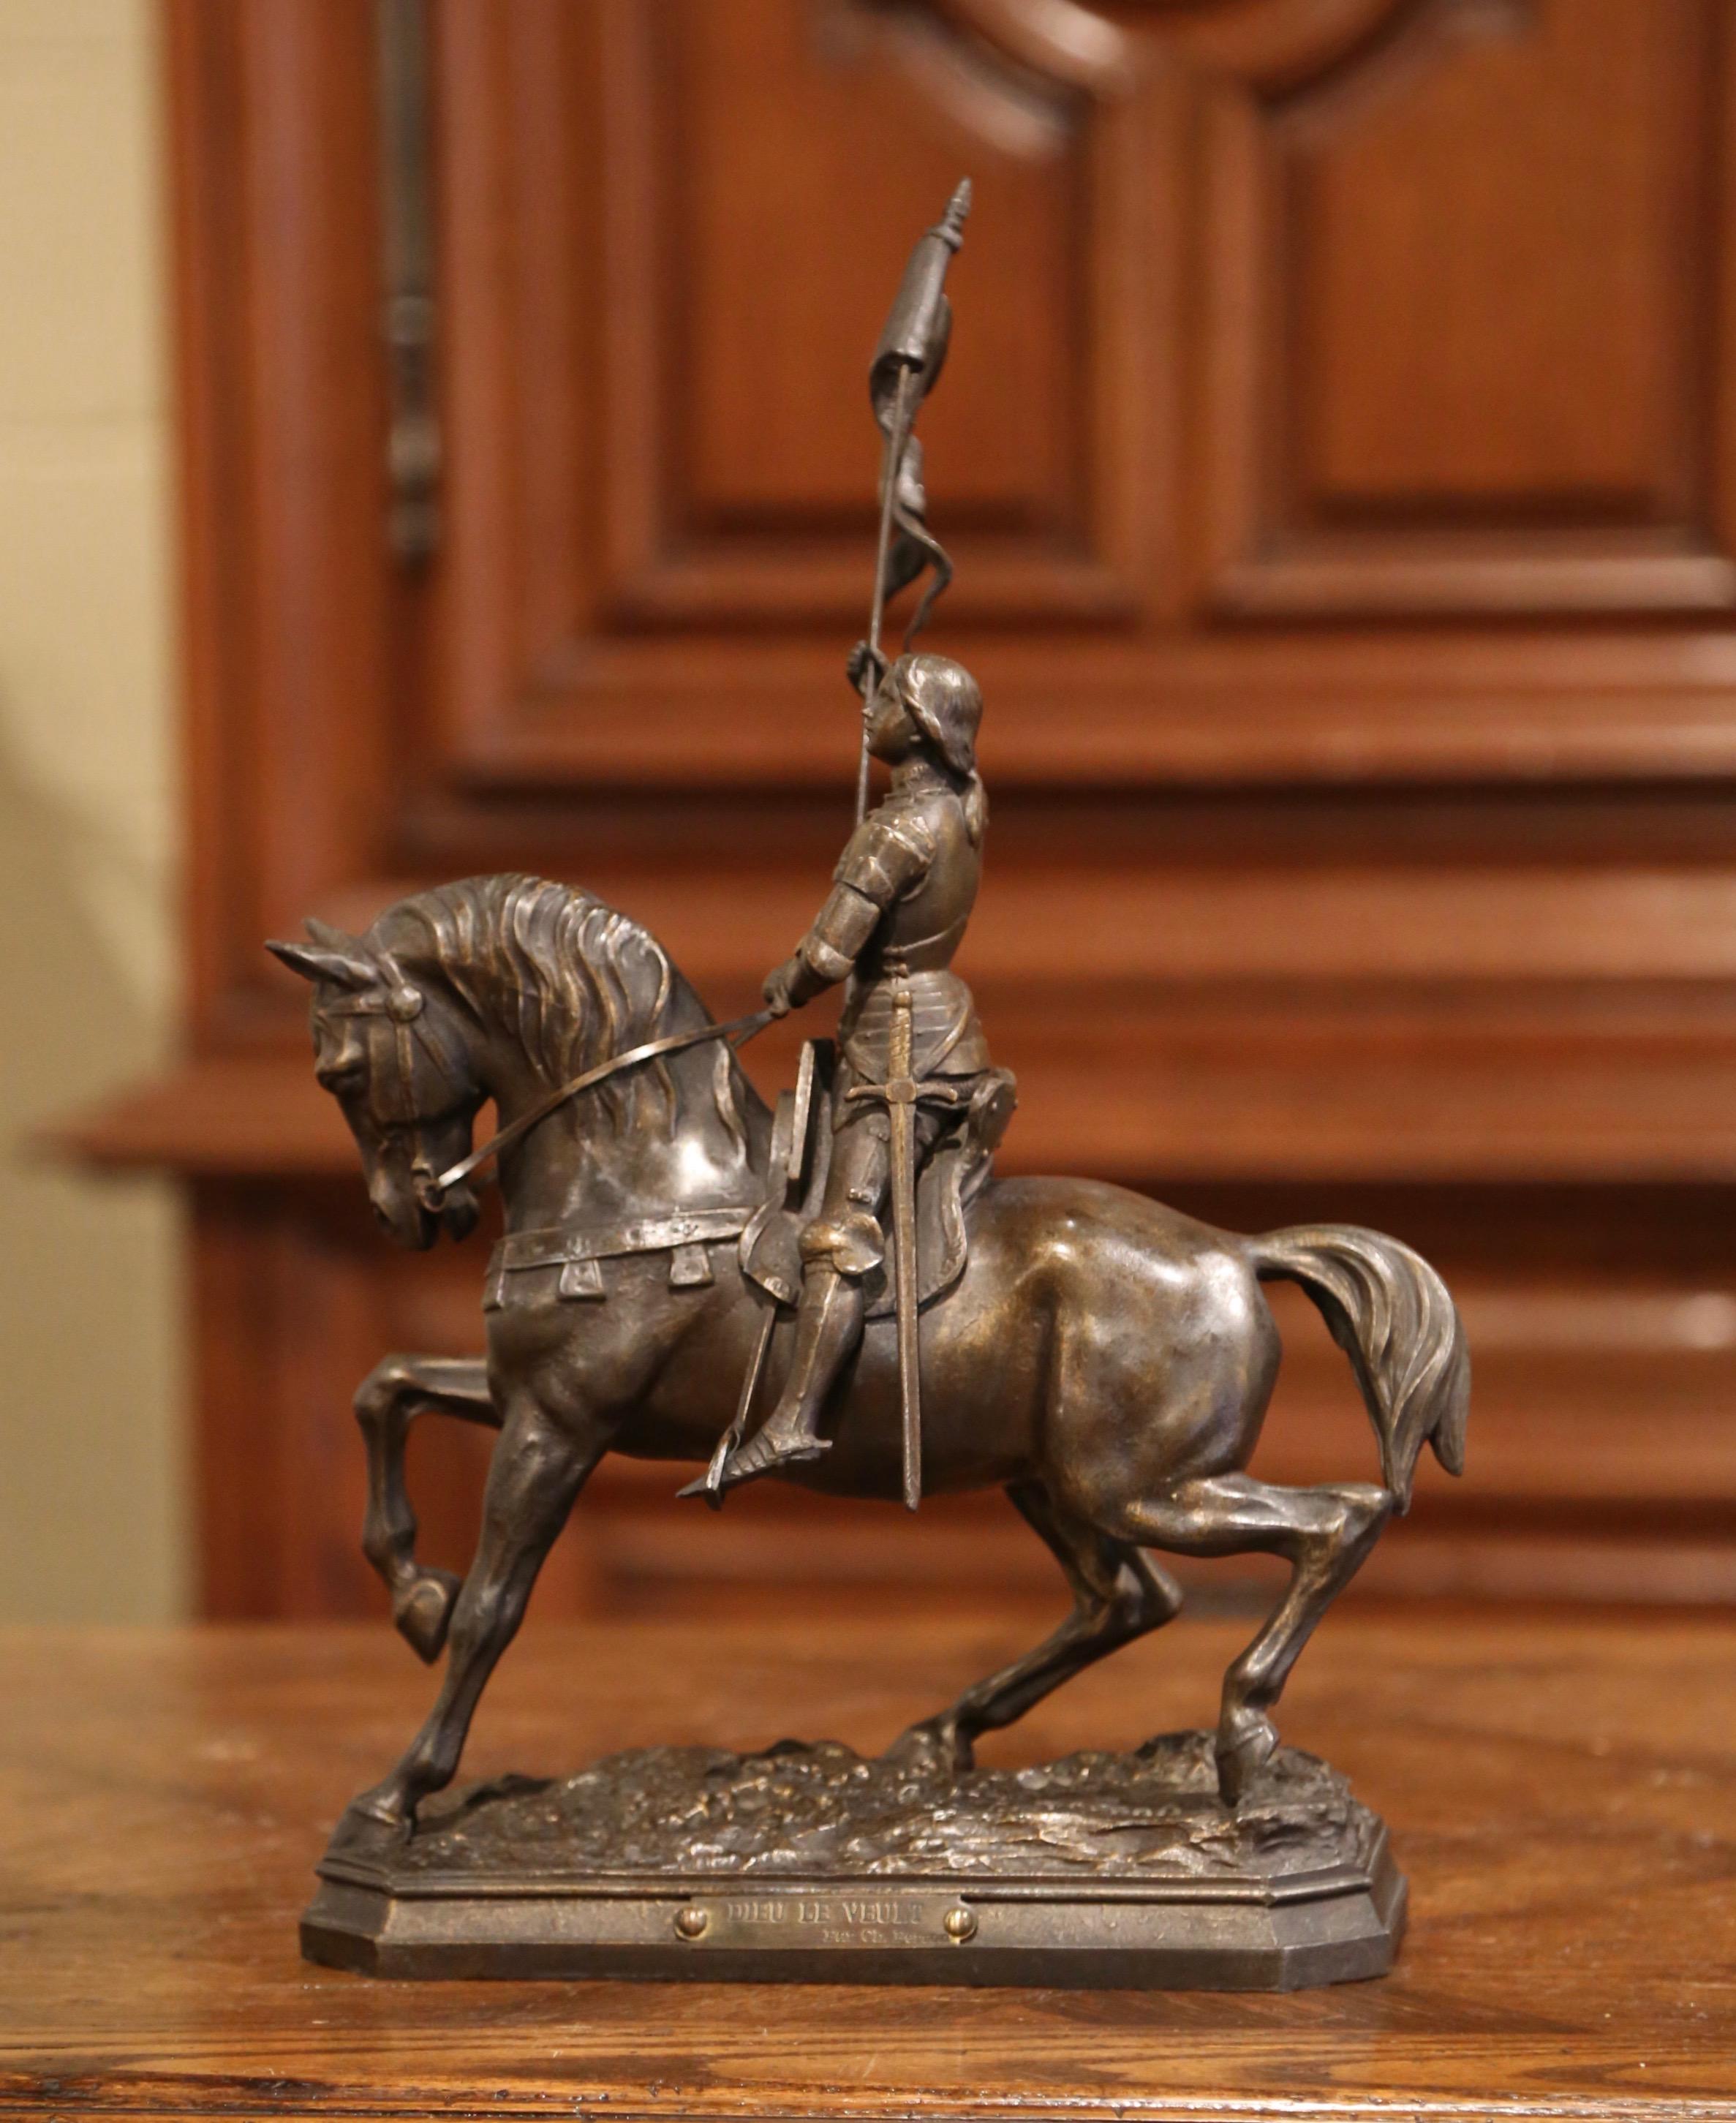 Crafted in France circa 1890, the antique figure depicts Sainte Jeanne d'Arc on her horse waving the victory flag after the battle of Orleans. The sculpture titled 